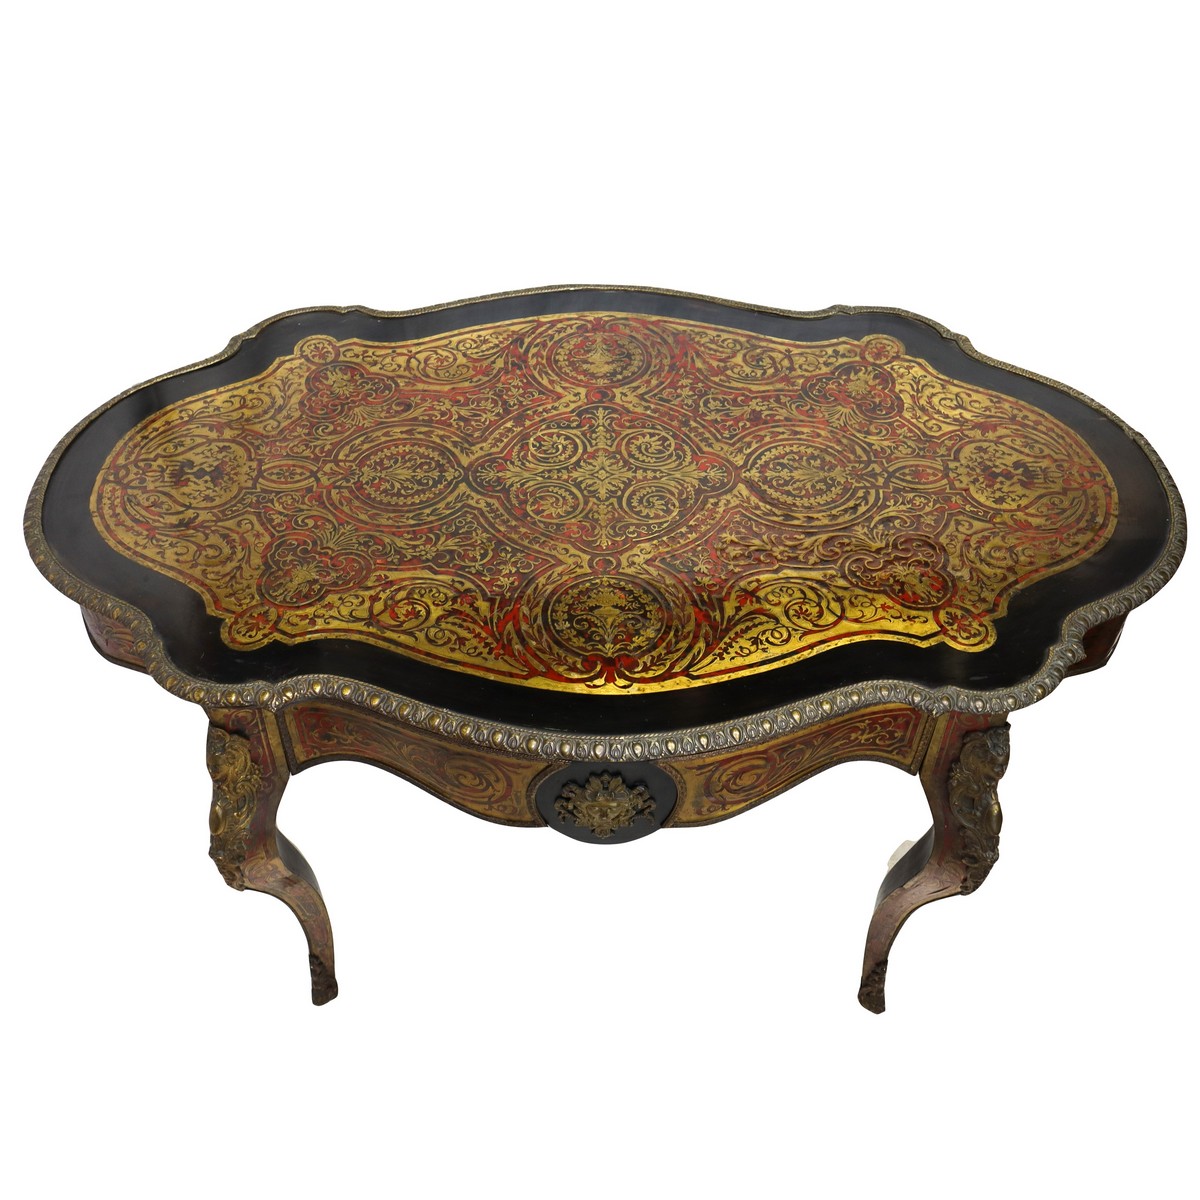 Boulle table, Late 19th century - Image 2 of 4